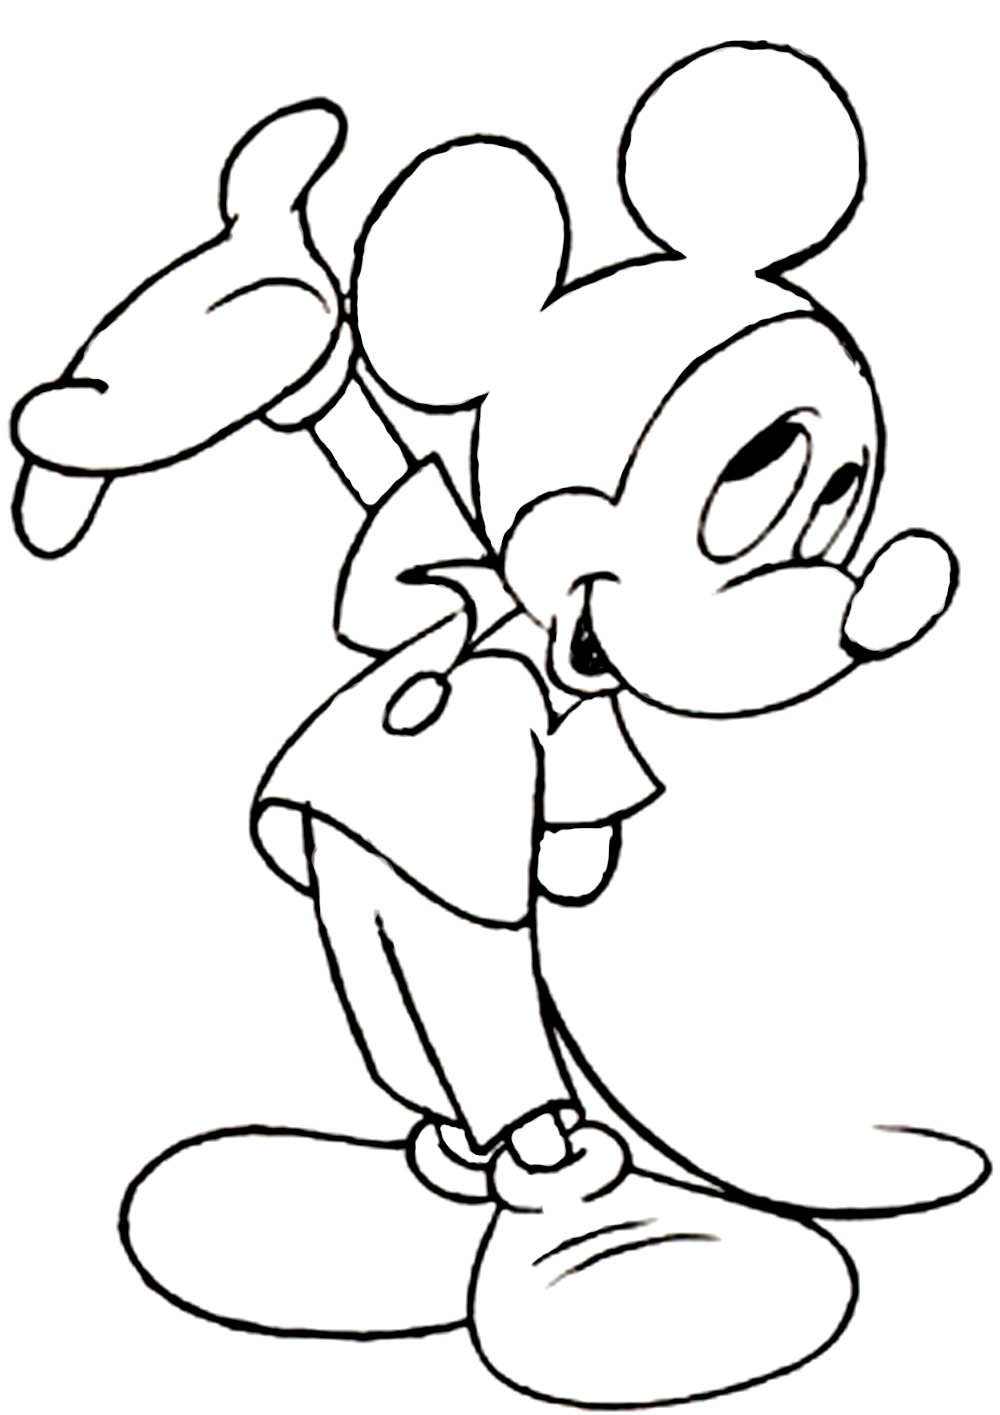 mickey mouse clip art free black and white - photo #27